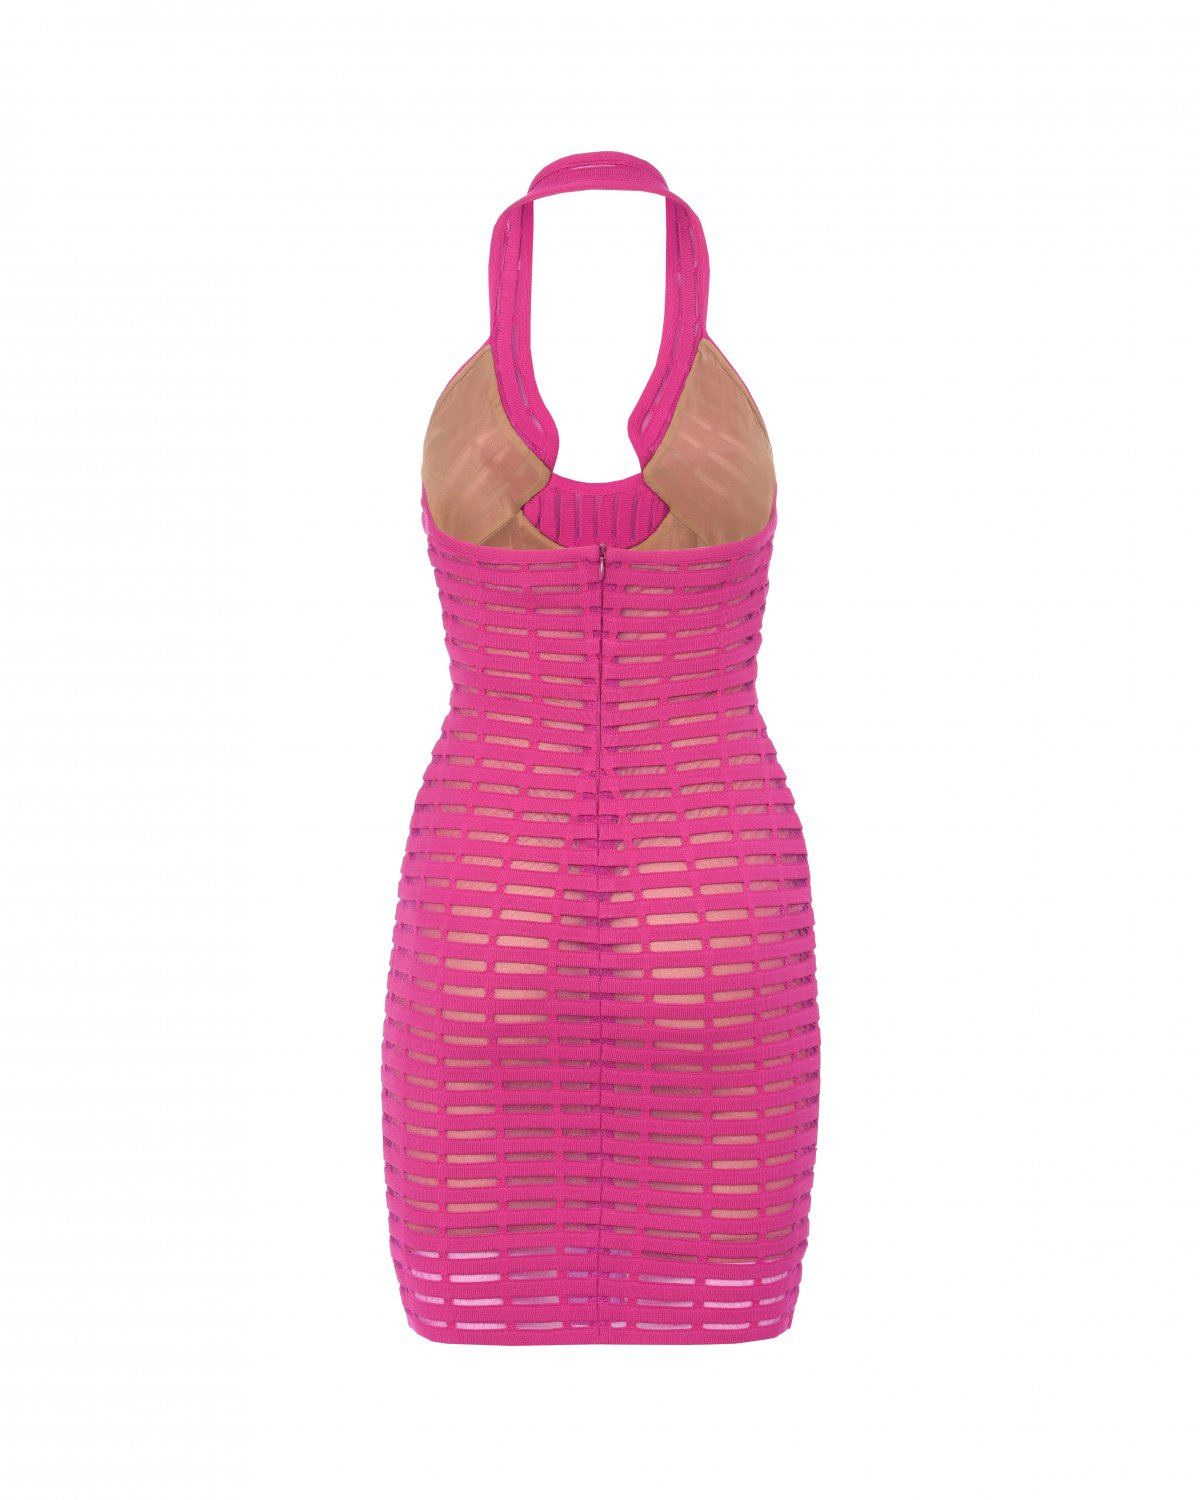 Fuchsia iconic dress with halter neckline | Iconic Capsule Collection, 73_74 | Genny